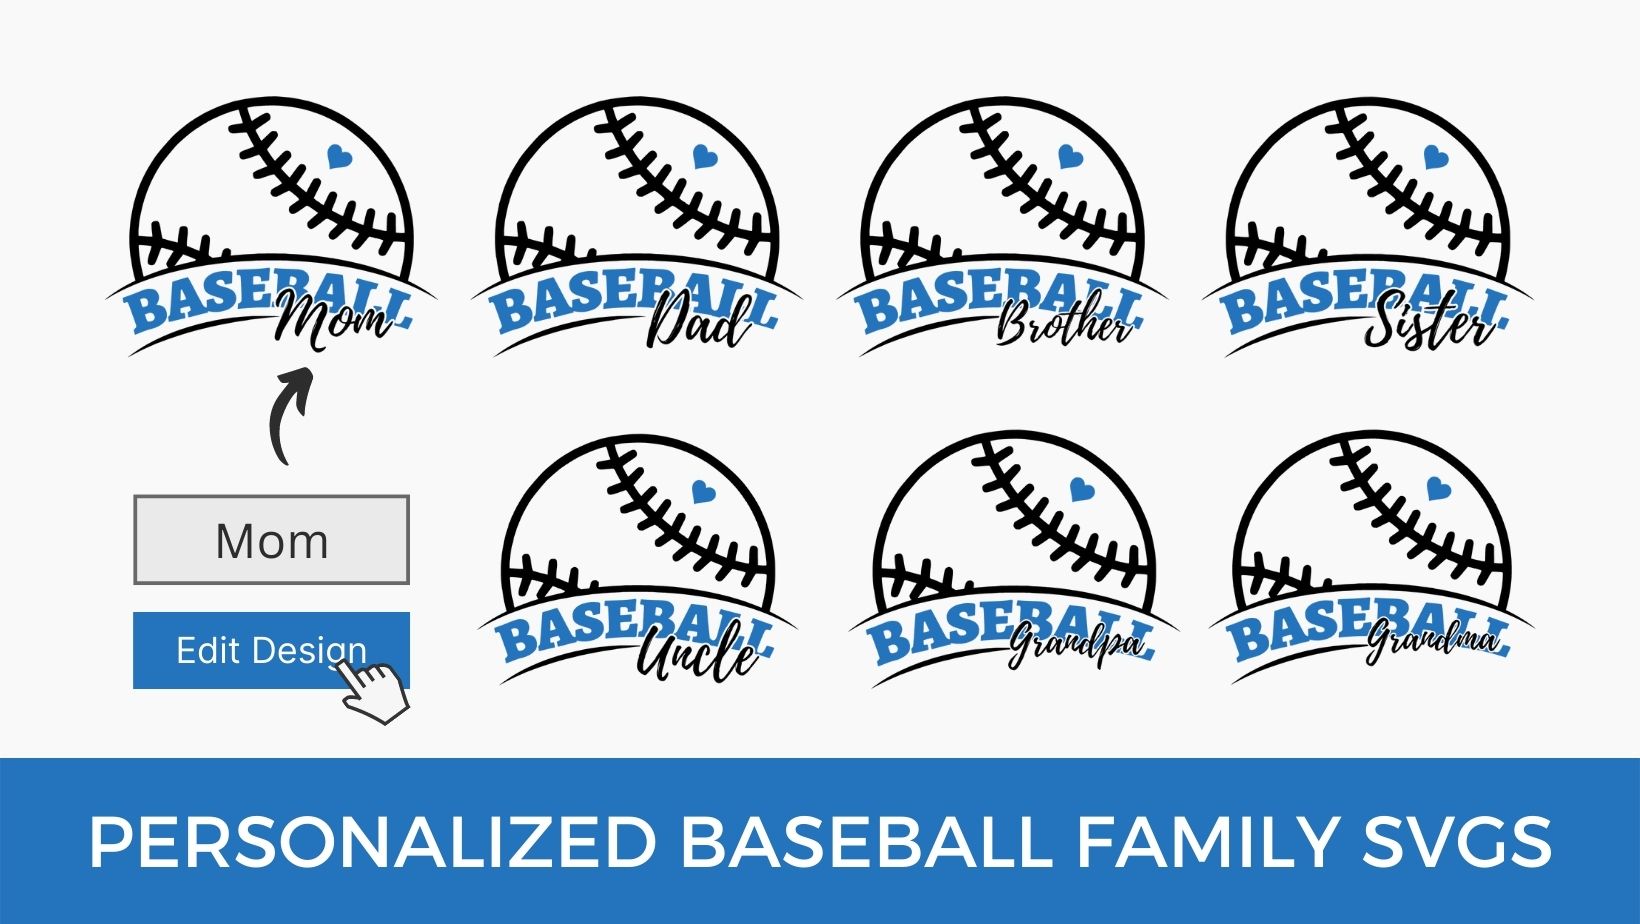 Personalized Baseball Family SVG Download cricut silhouette laser cut sports ball family